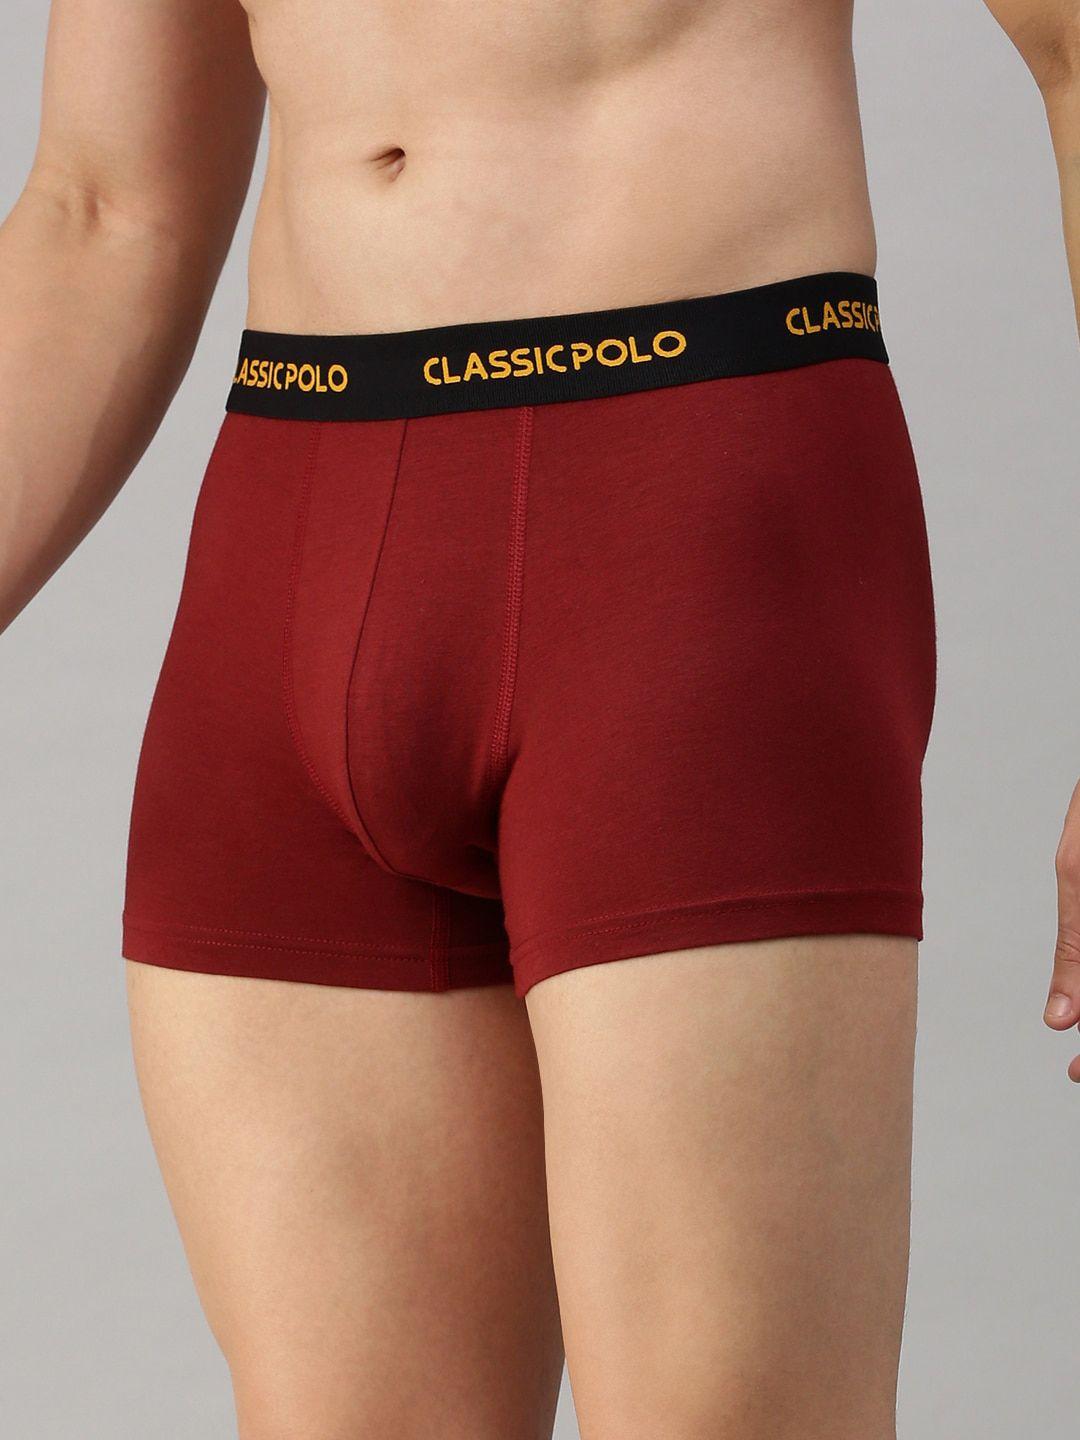 classic polo men double layered contoured pouch slim fit modal short trunks